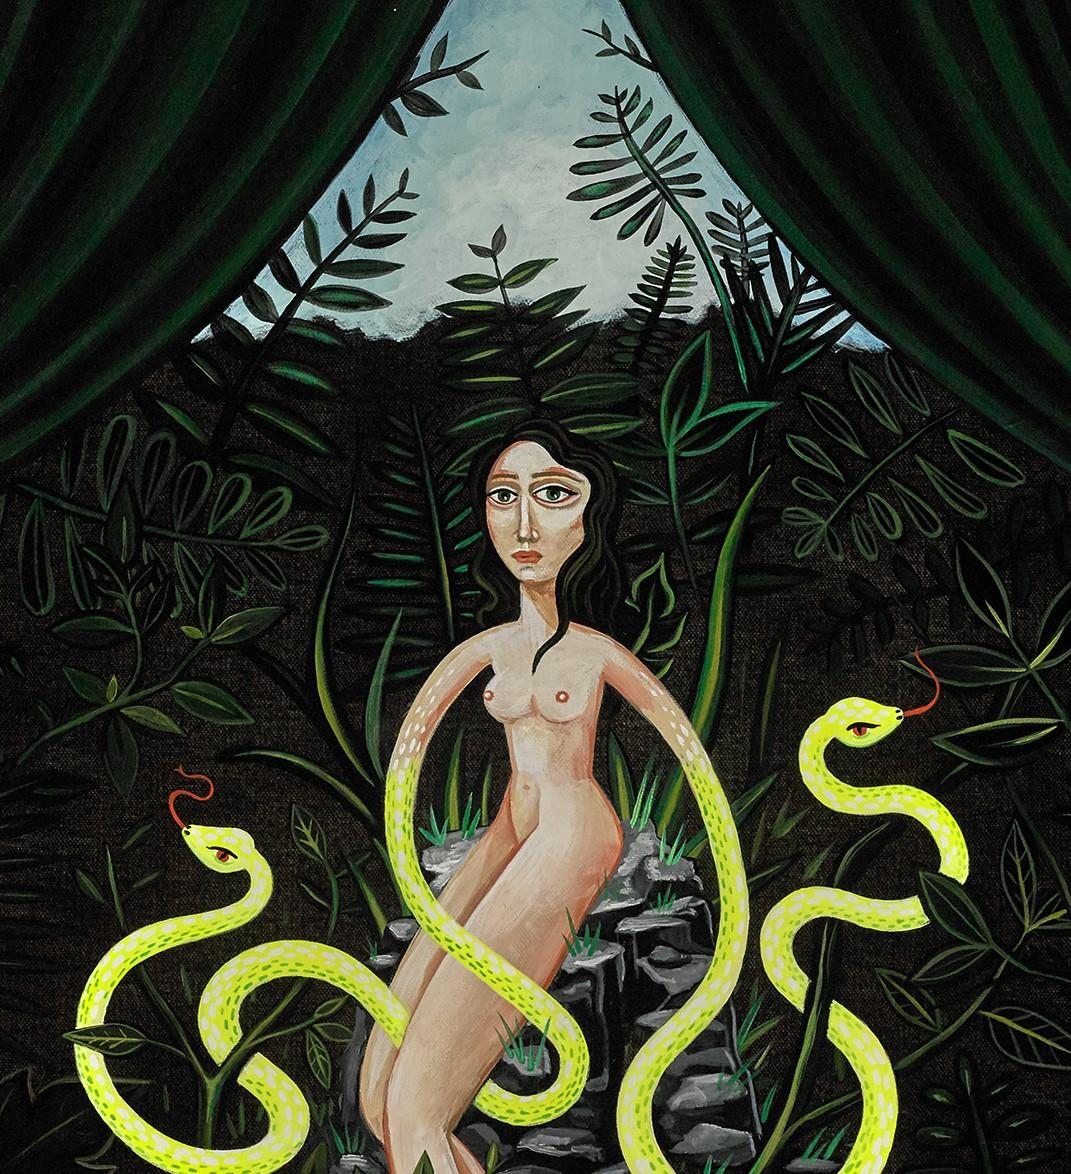 Strange Botanica is an acrylic on canvas painting, with an image size of 30 x 24 inches, signed 'afn' lower right and framed in a contemporary black moulding.

Anne Faith Nicholls is a unique contemporary artist, illustrator, curator, and collector